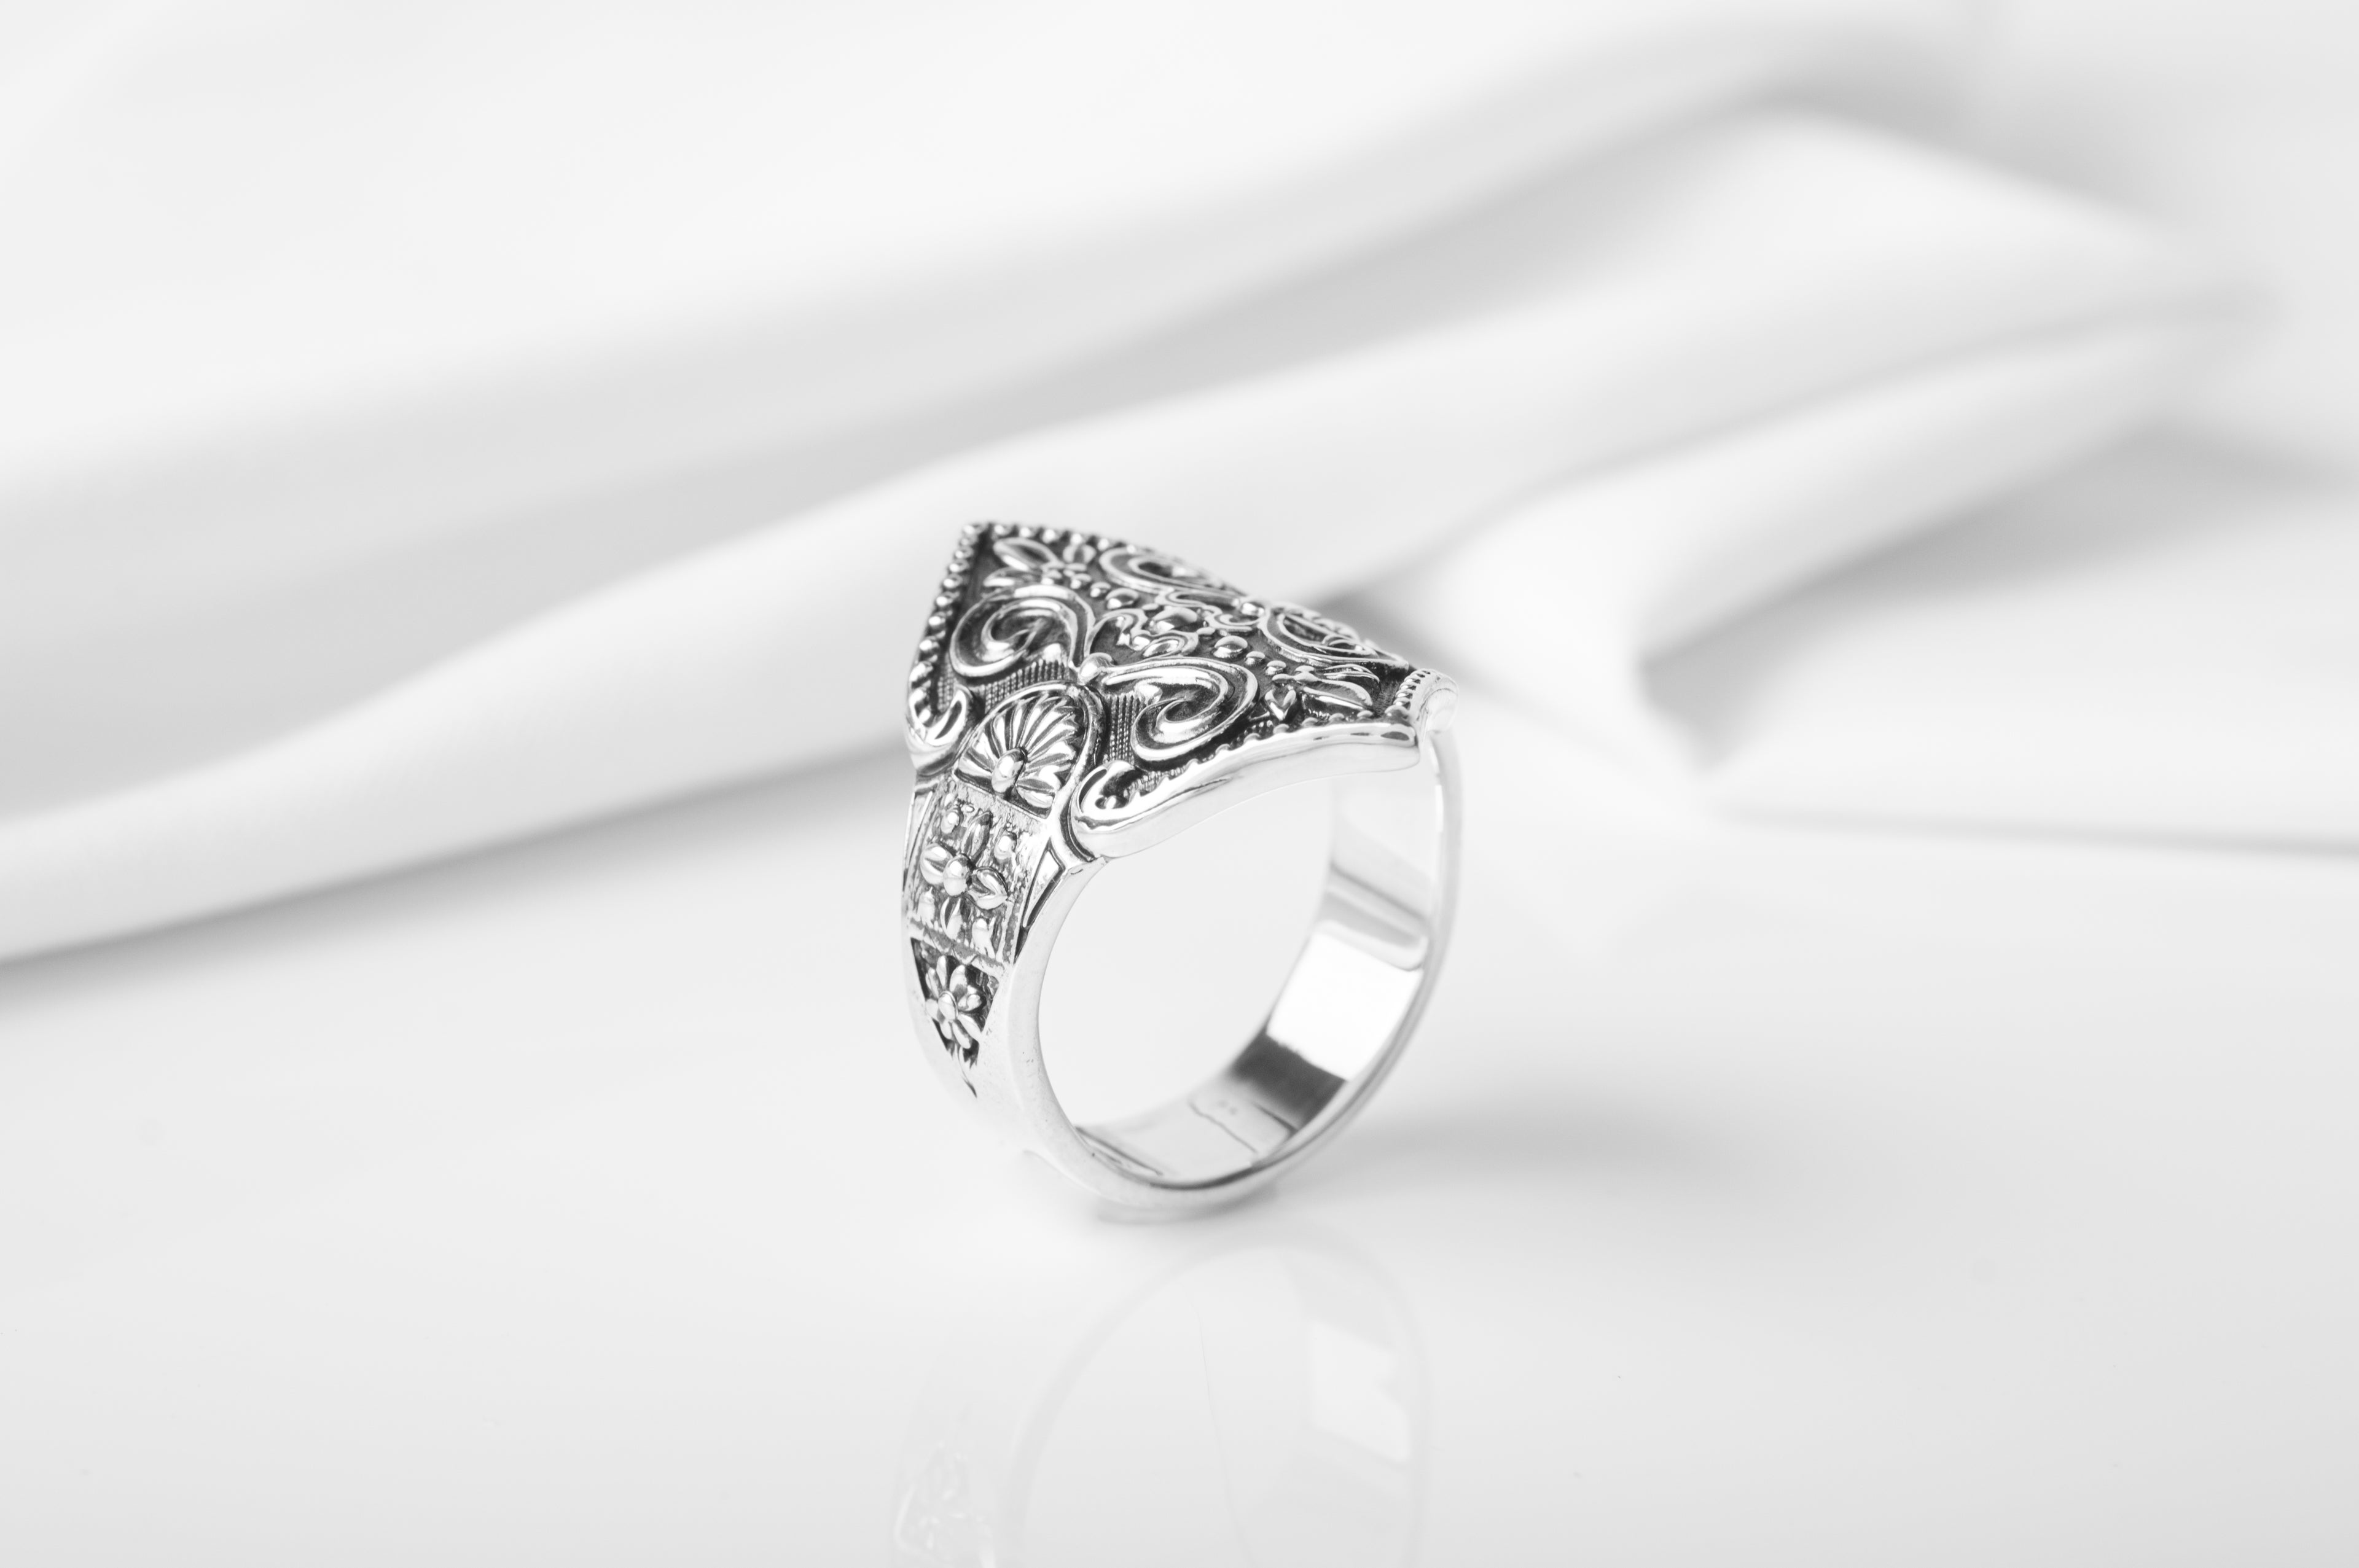 925 Silver Fashion ring with Leaves patterns, unique handcrafted jewelry